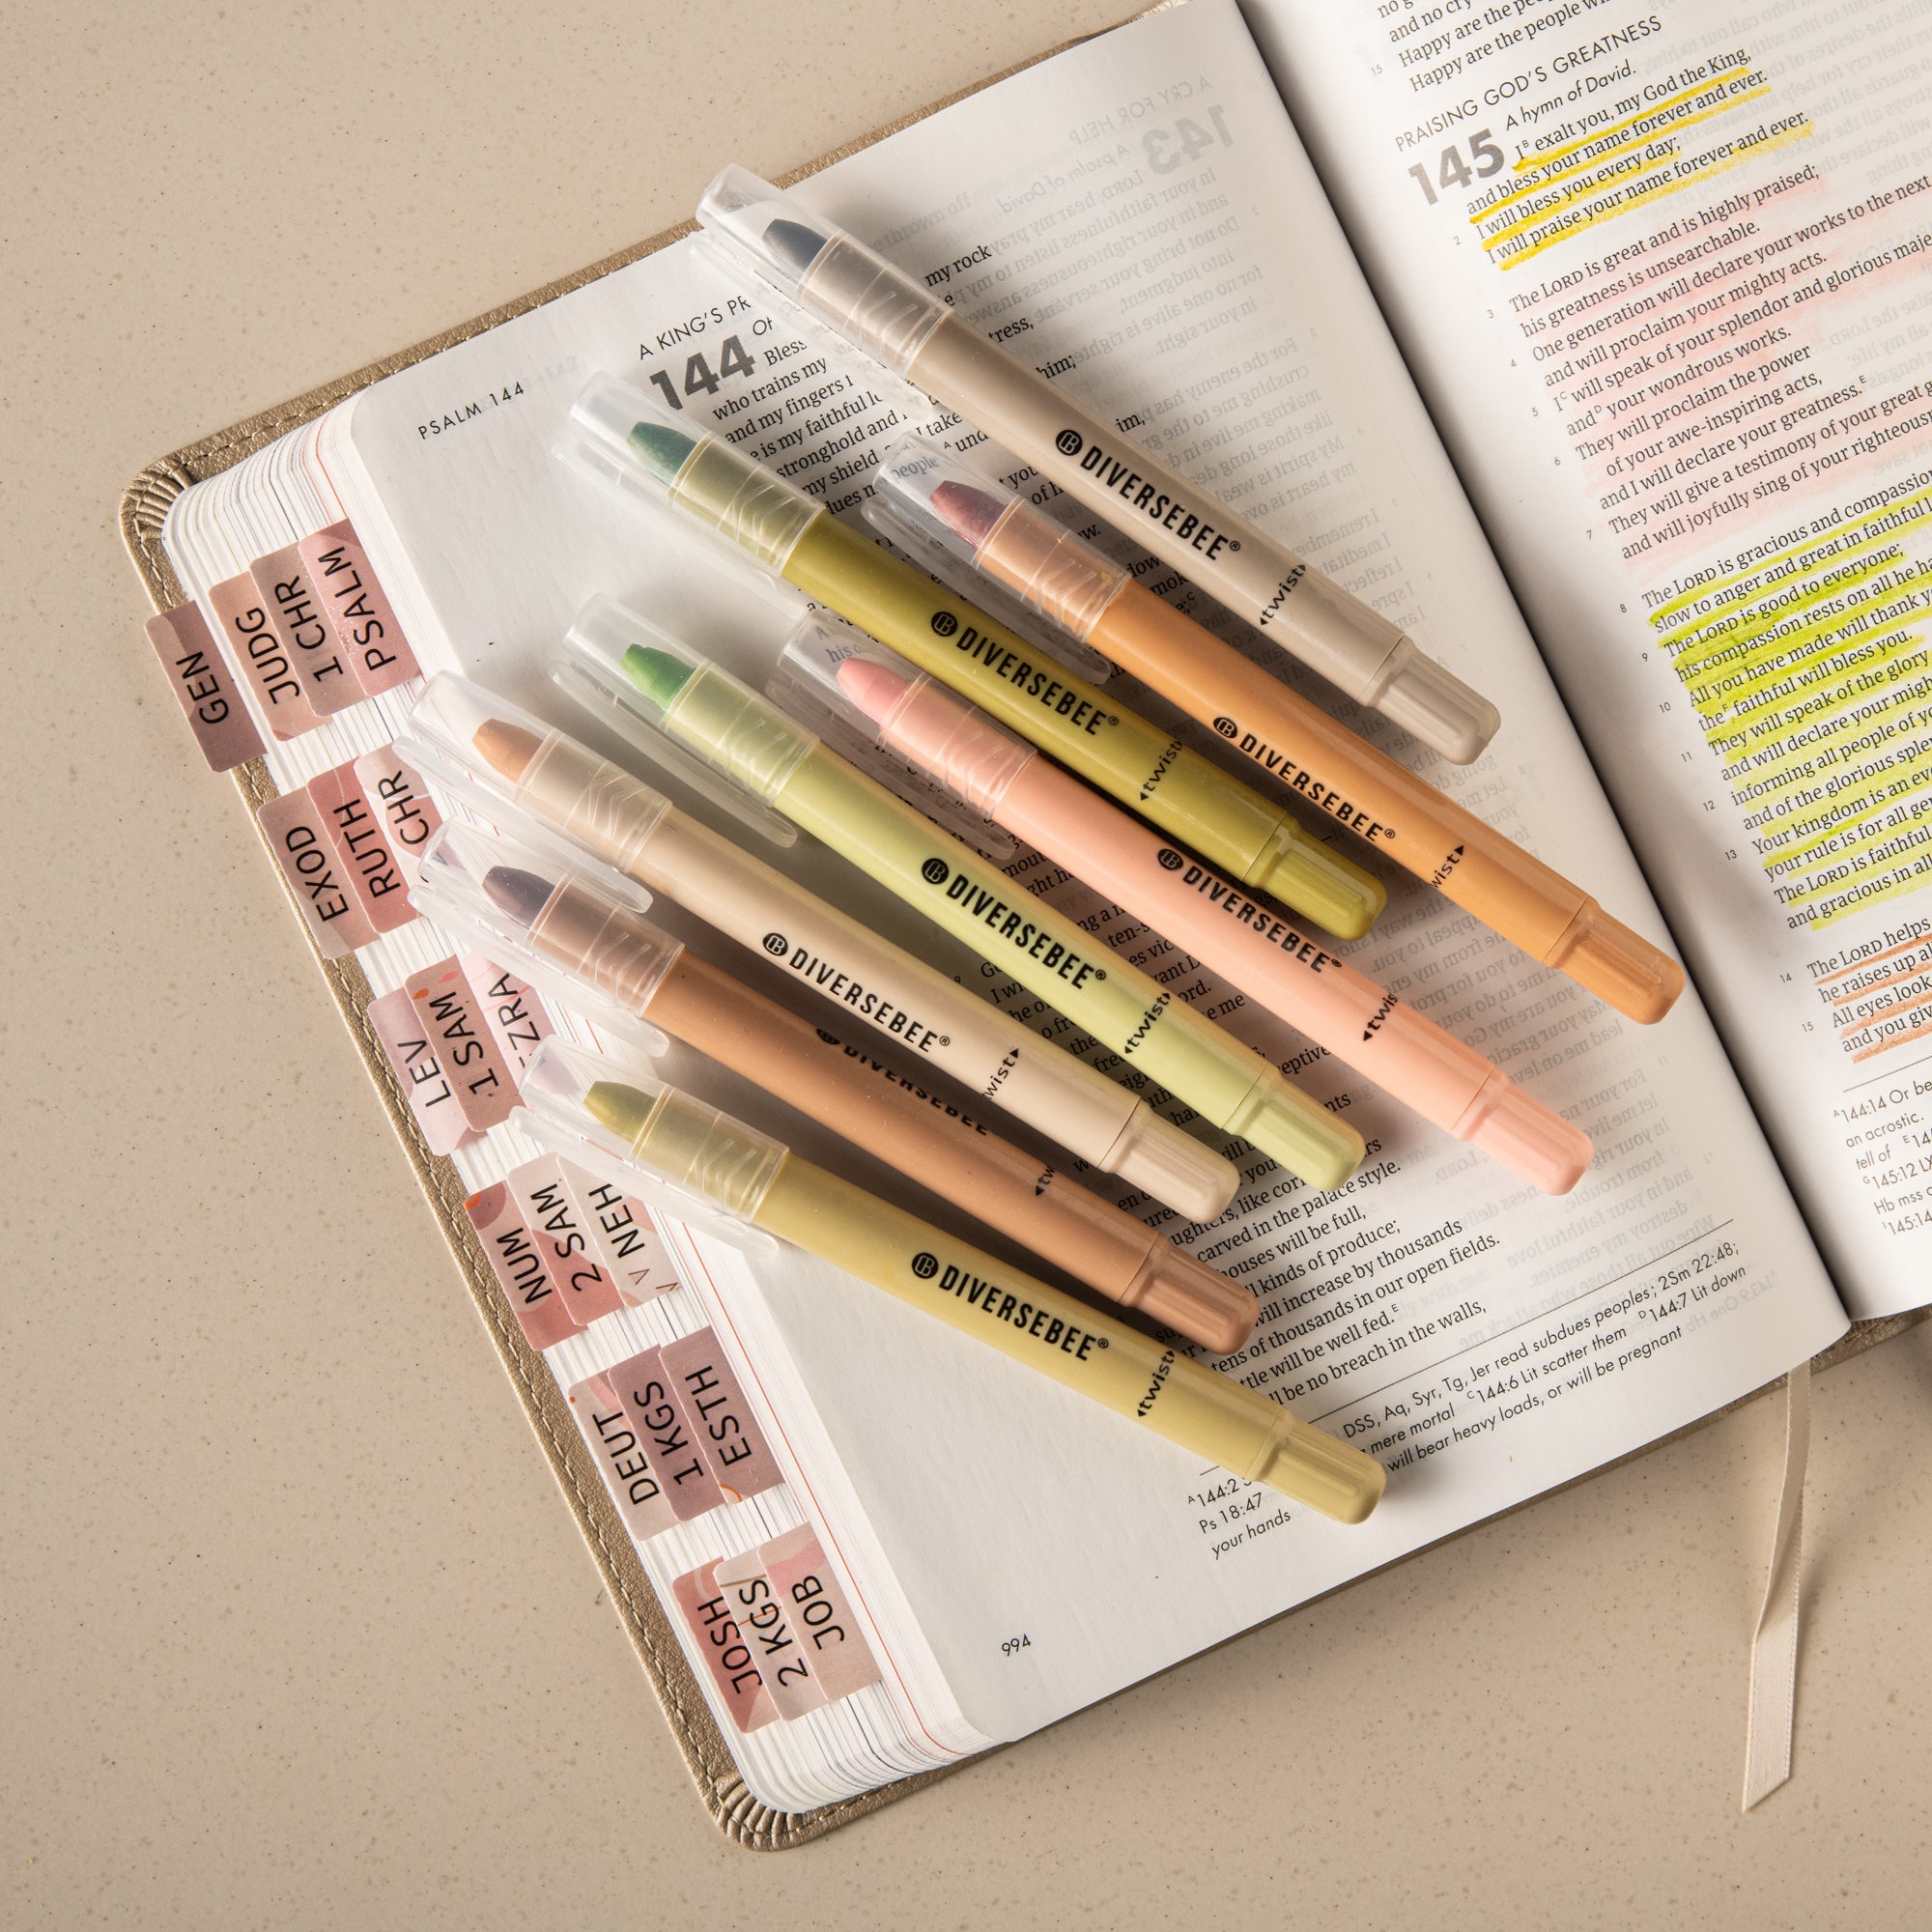 Mr. Pen- No Bleed Gel Bible Highlighters, Yellow, Pack of 8